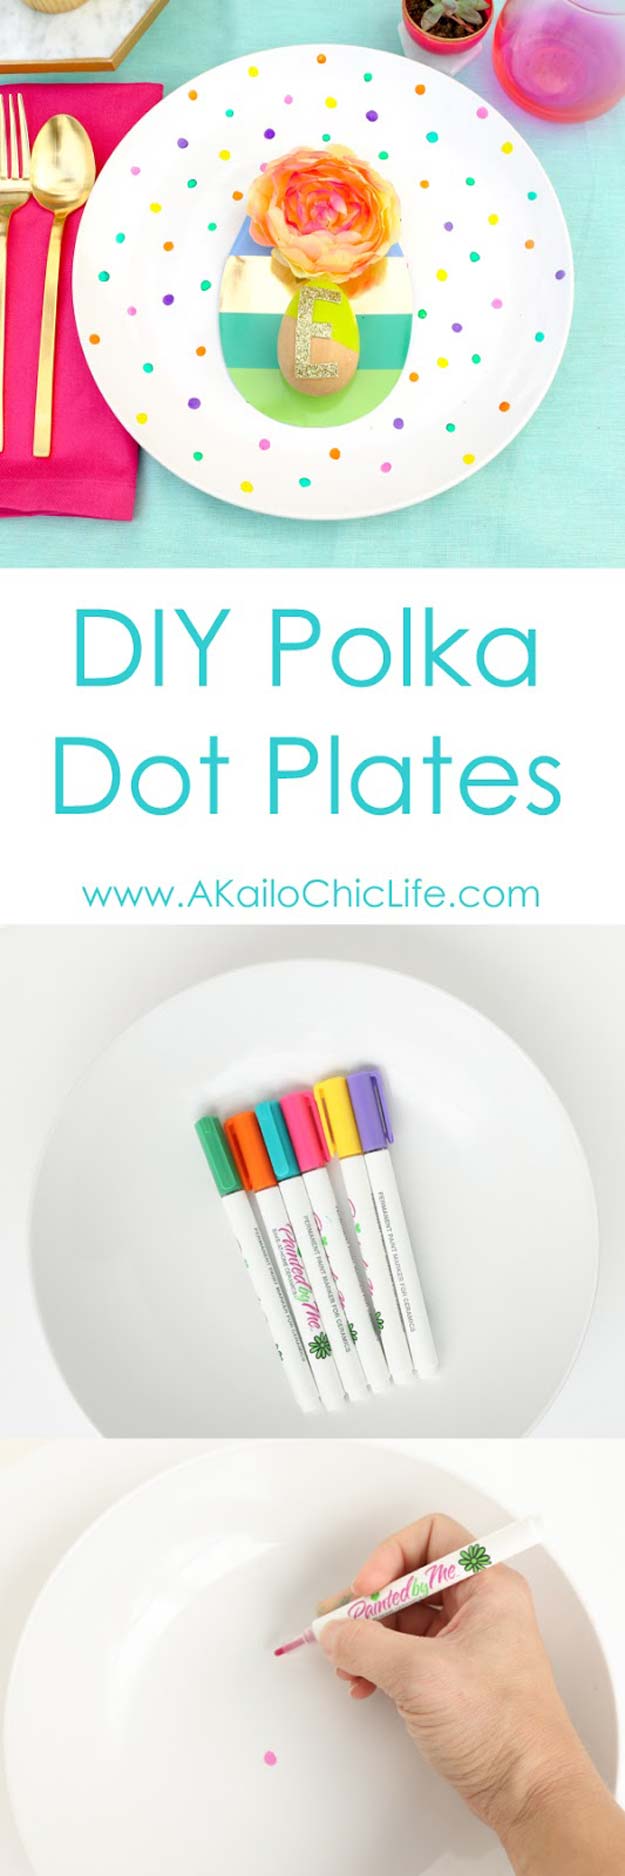 DIY Polka Dot Crafts and Projects - DIY Polka Dot Plates - Cool Clothes, Room and Home Decor, Wall Art, Mason Jars and Party Ideas, Canvas, Fabric and Paint Project Tutorials - Fun Craft Ideas for Teens, Kids and Adults Make Awesome DIY Gifts